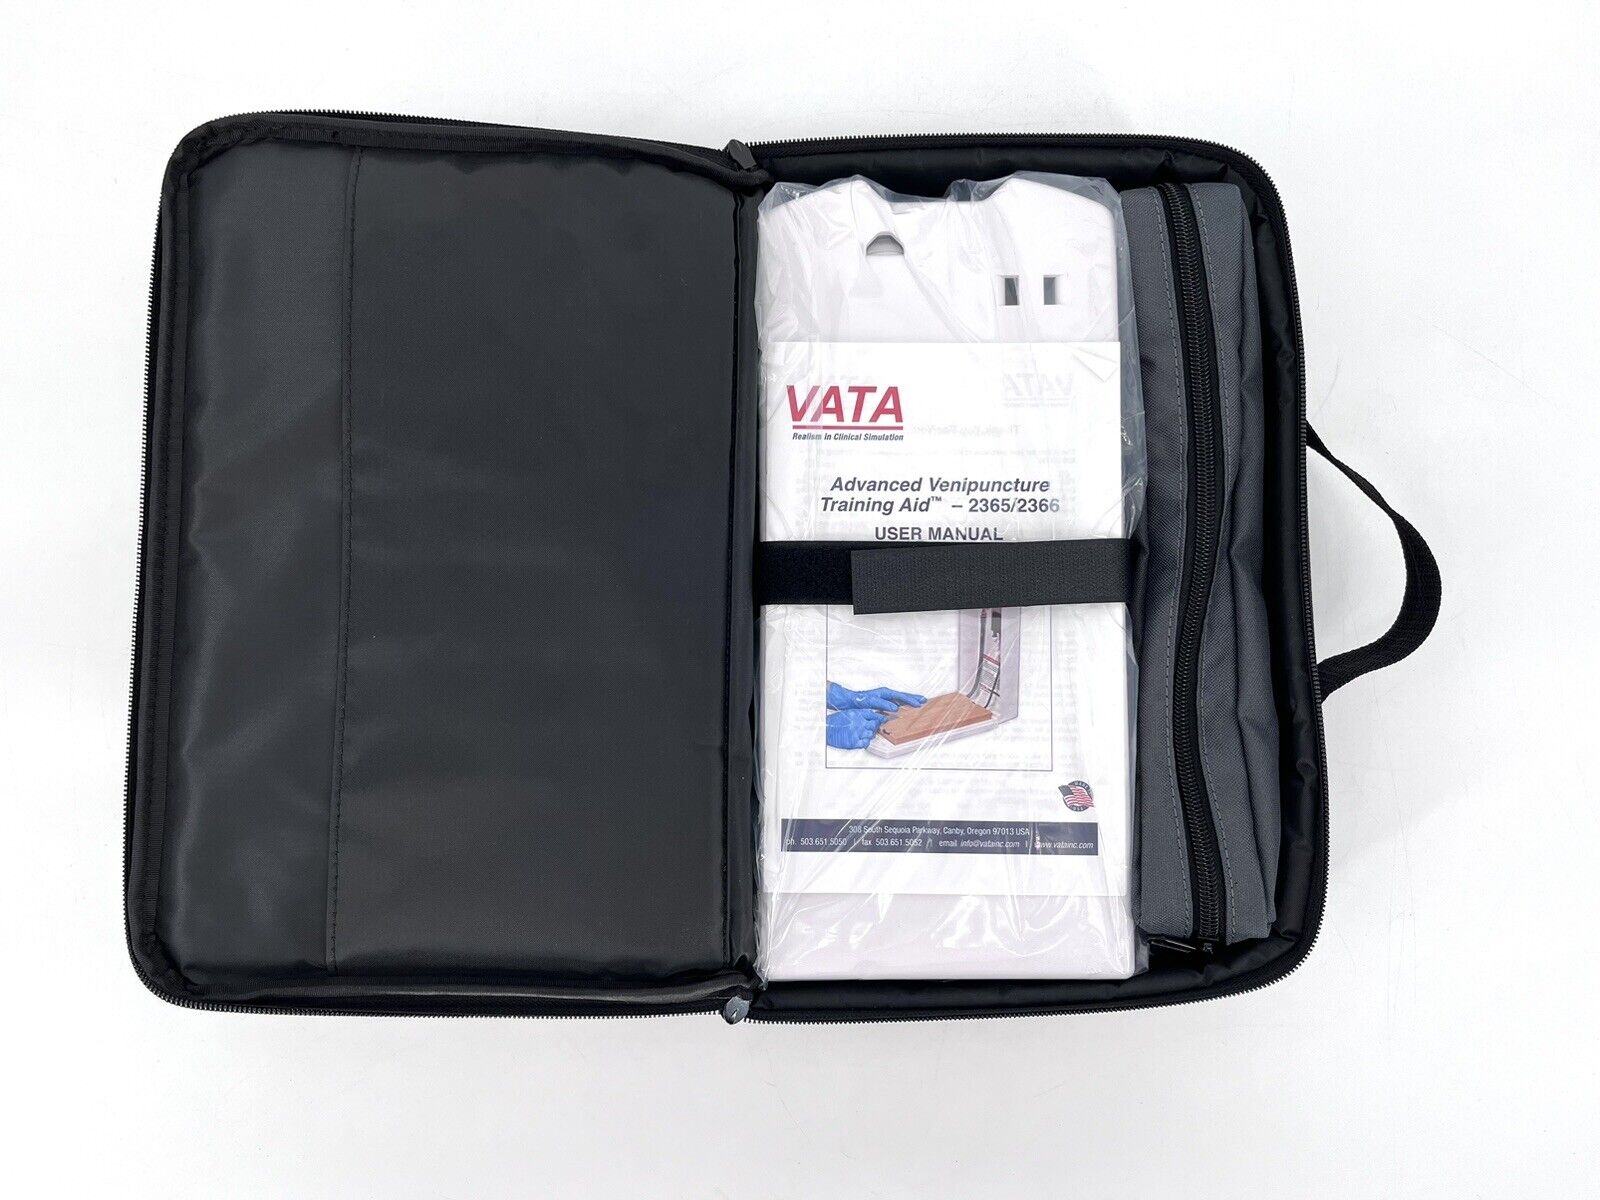 VATA 2365 - Advanced Venipuncture Training Aid™ With Carrying Case - Brand NEW